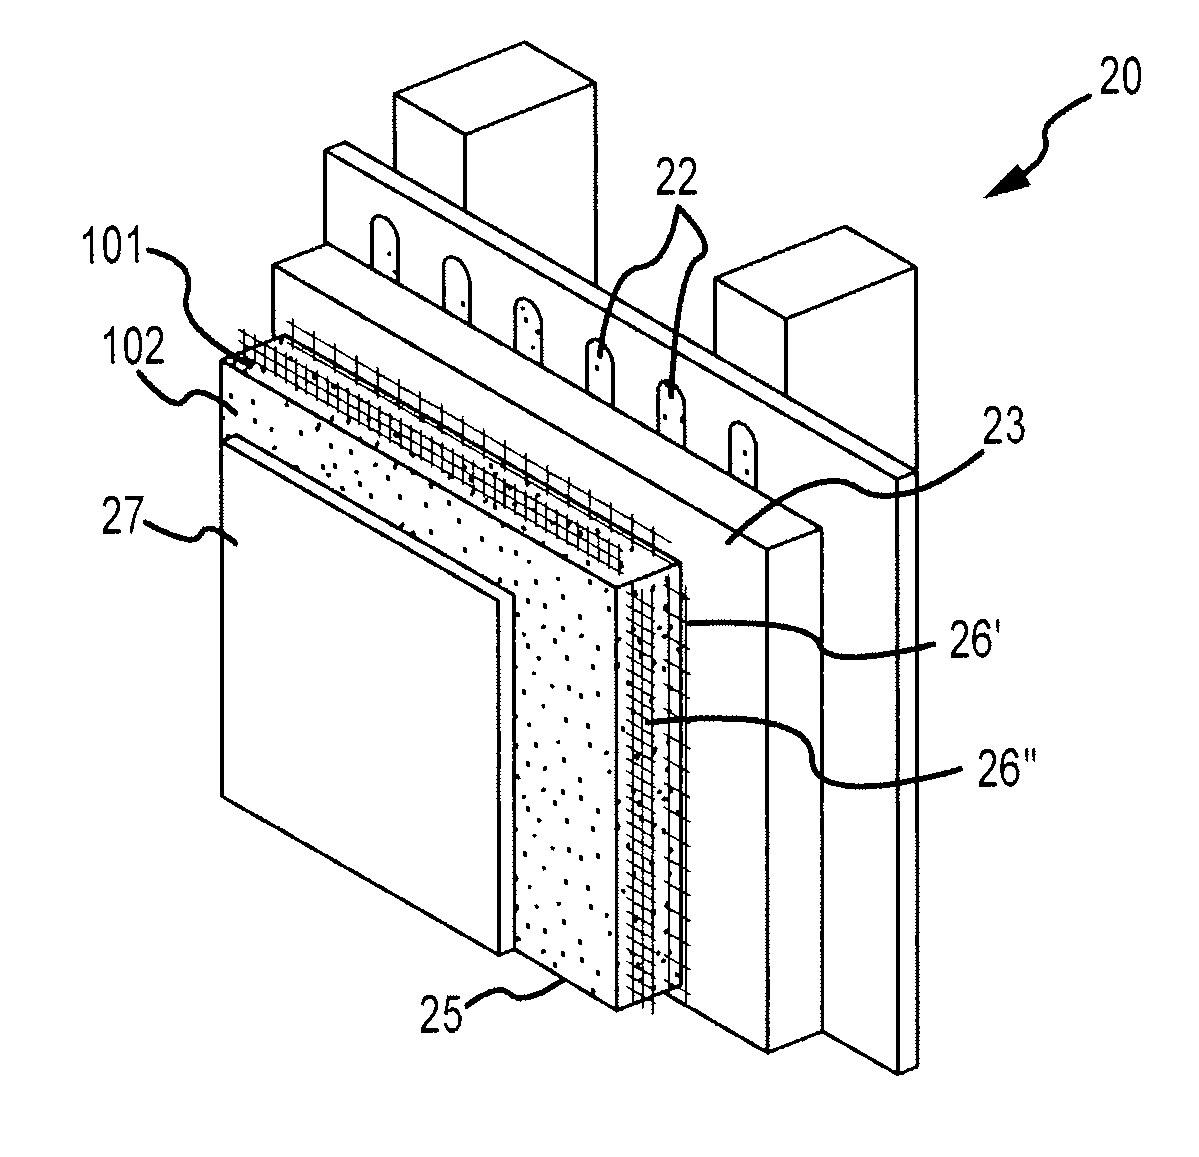 Eifs structures, methods of manufacturing and compositions for use in eifs cladding for reducing bird-related exterior wall damage